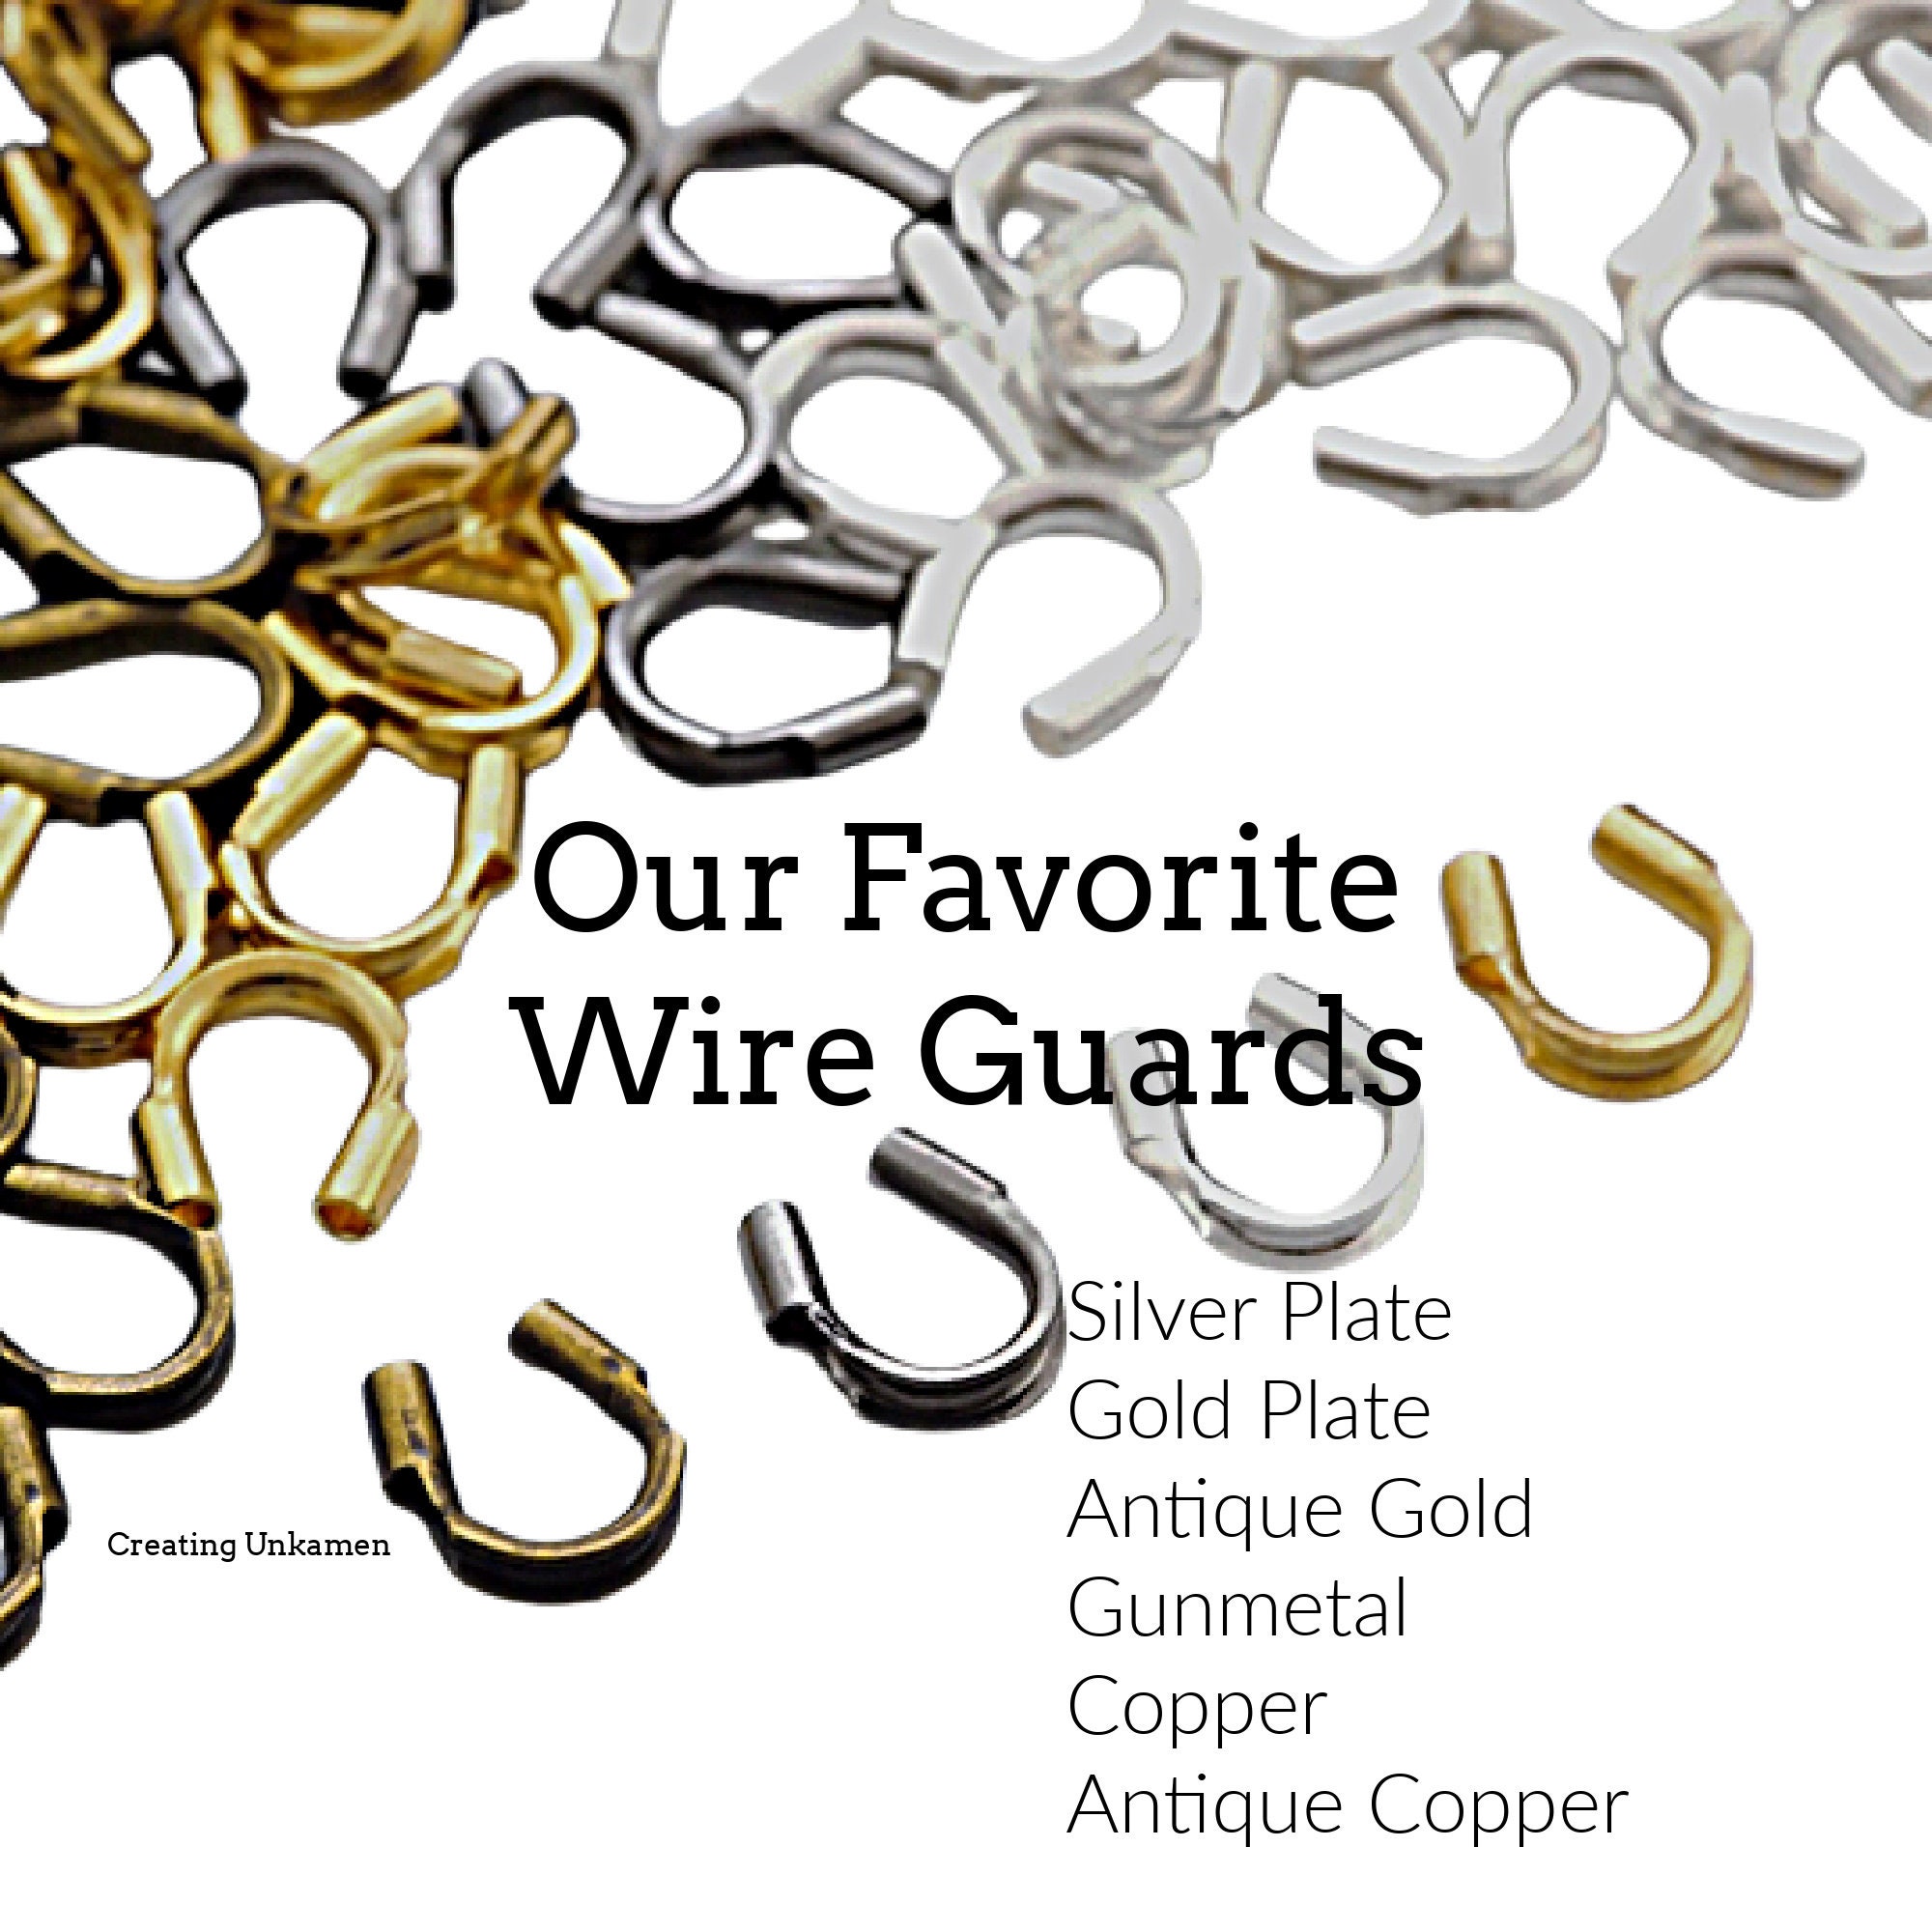 ABOOFAN Small Tools Small Straightener Wire Straightener Jewelry Findings  for Making Jewelry Wire Wrapping Tools Jewelry Findings and Supplies  Jewelry Making Plastic Necklace Hit Gold 